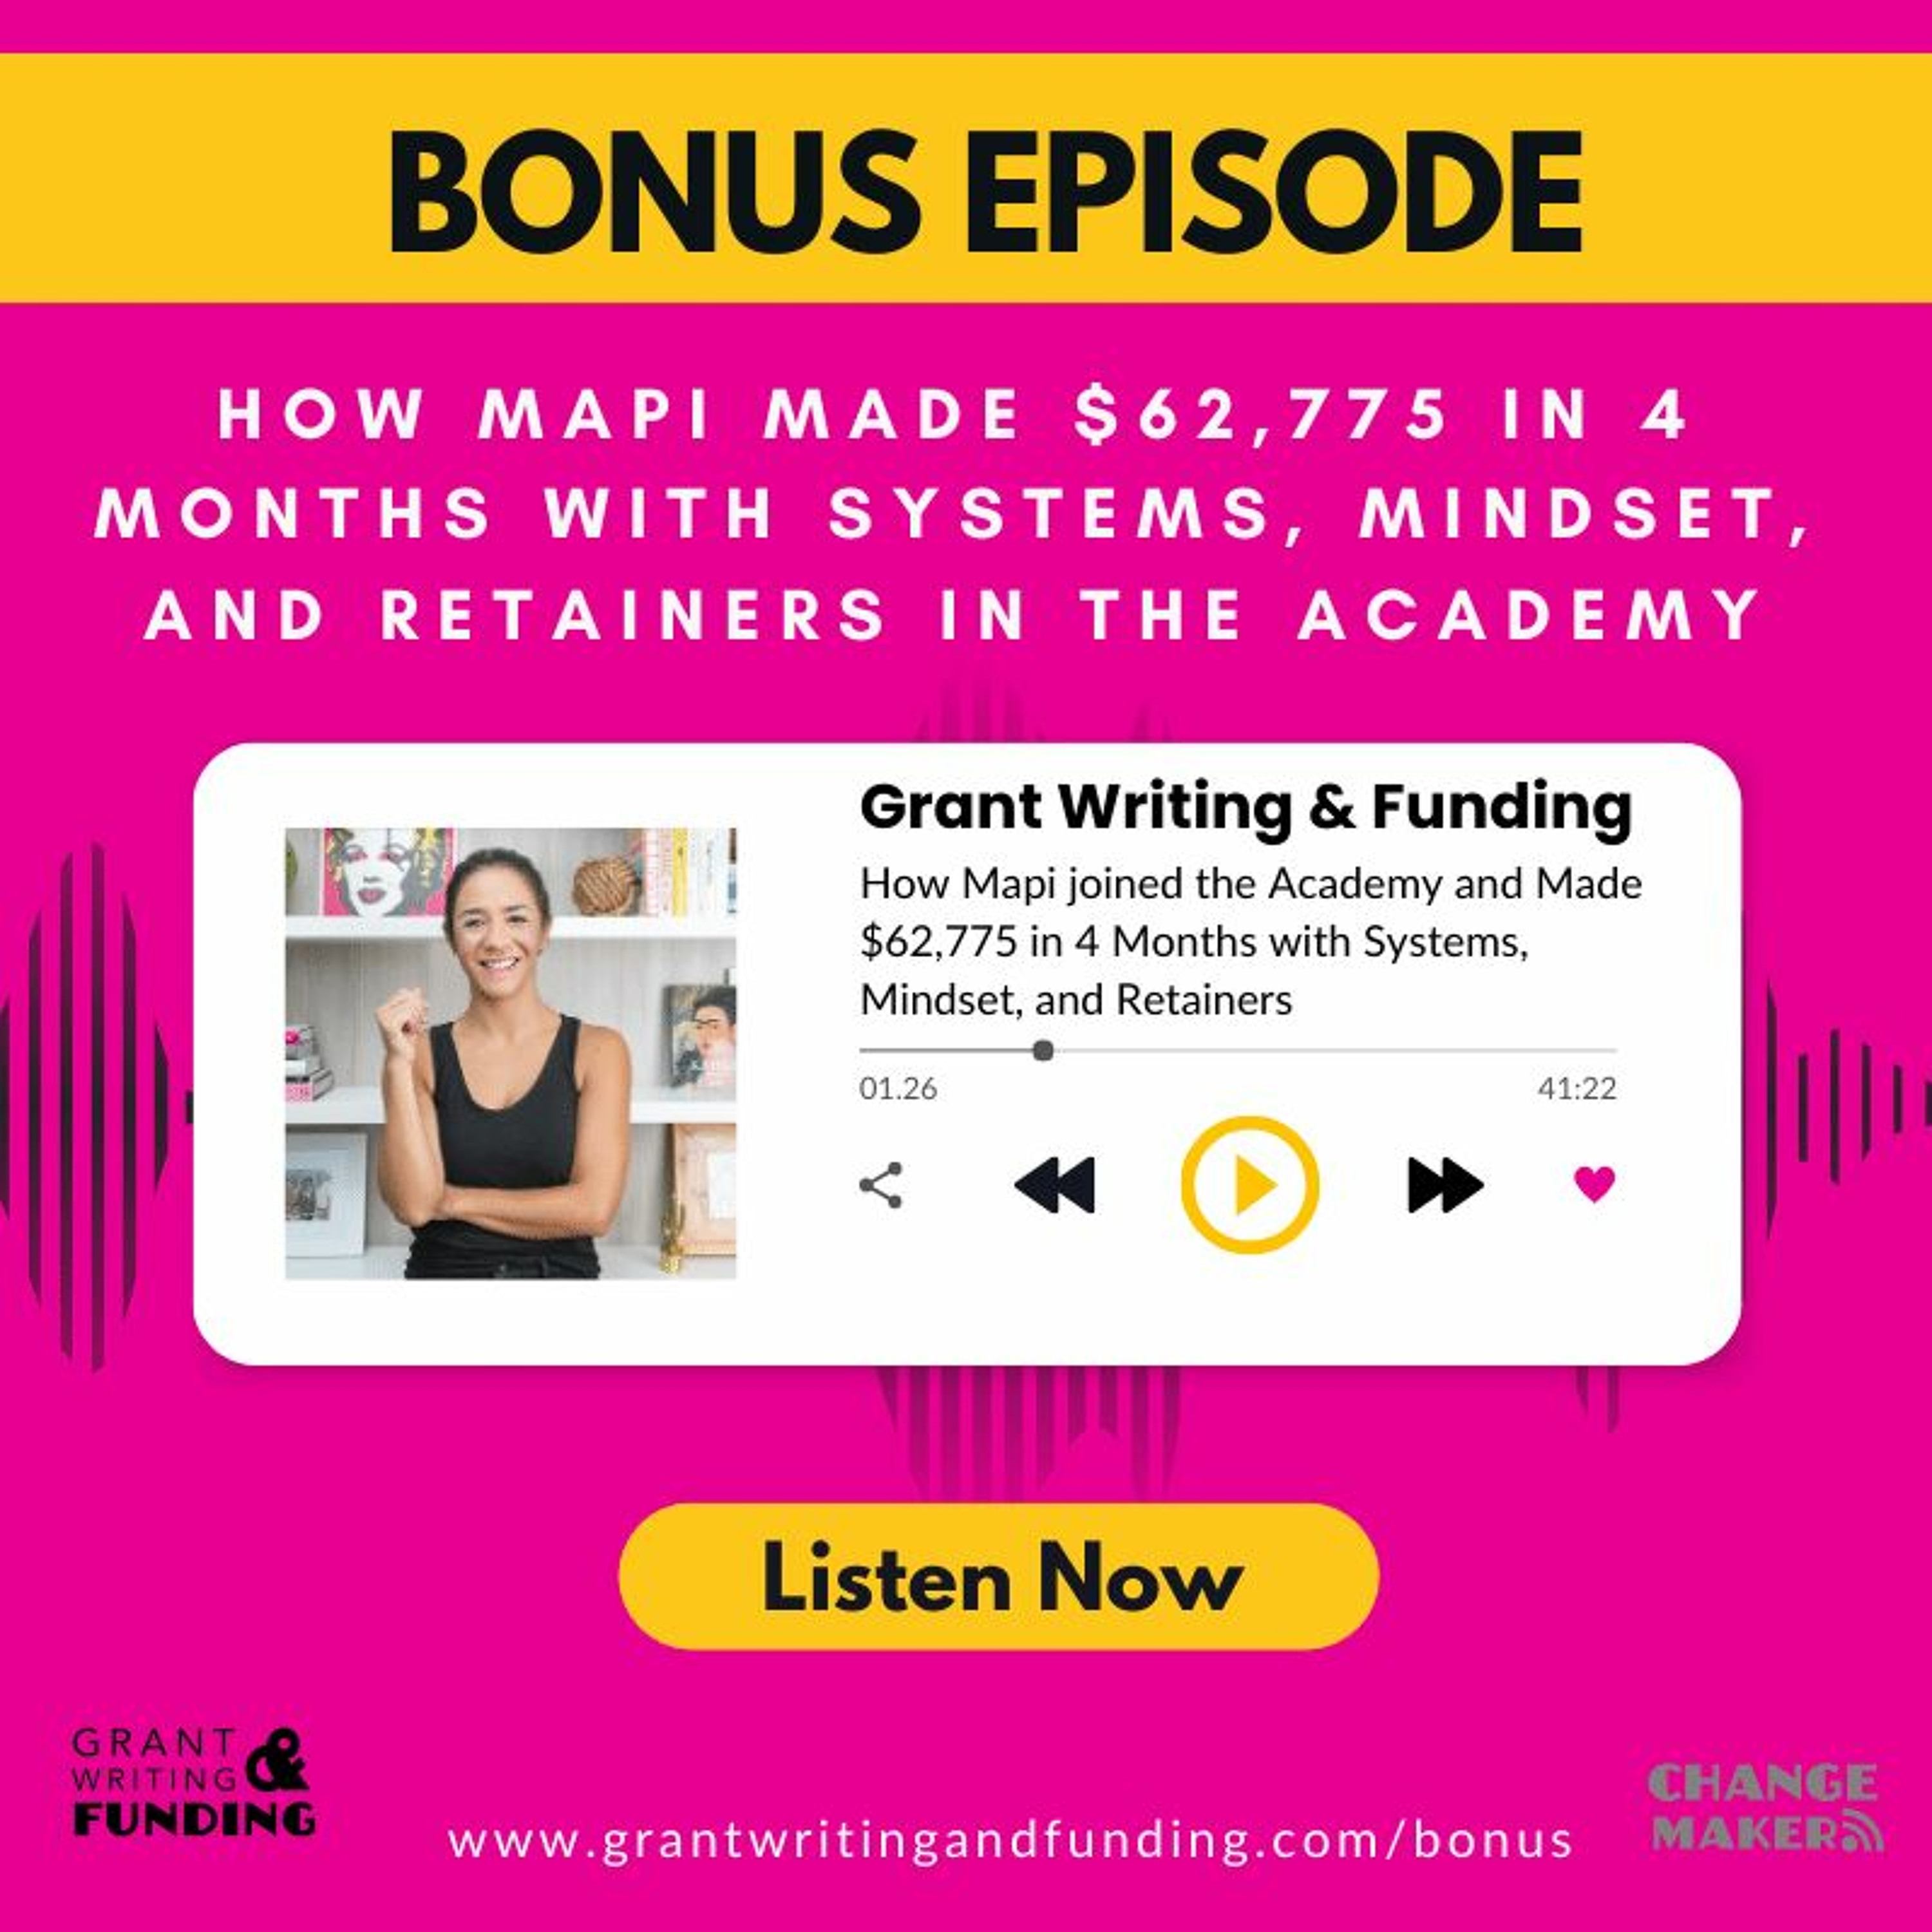 BONUS: How Mapi Made $62,775 in 4 Months with Systems, Mindset, and Retainers